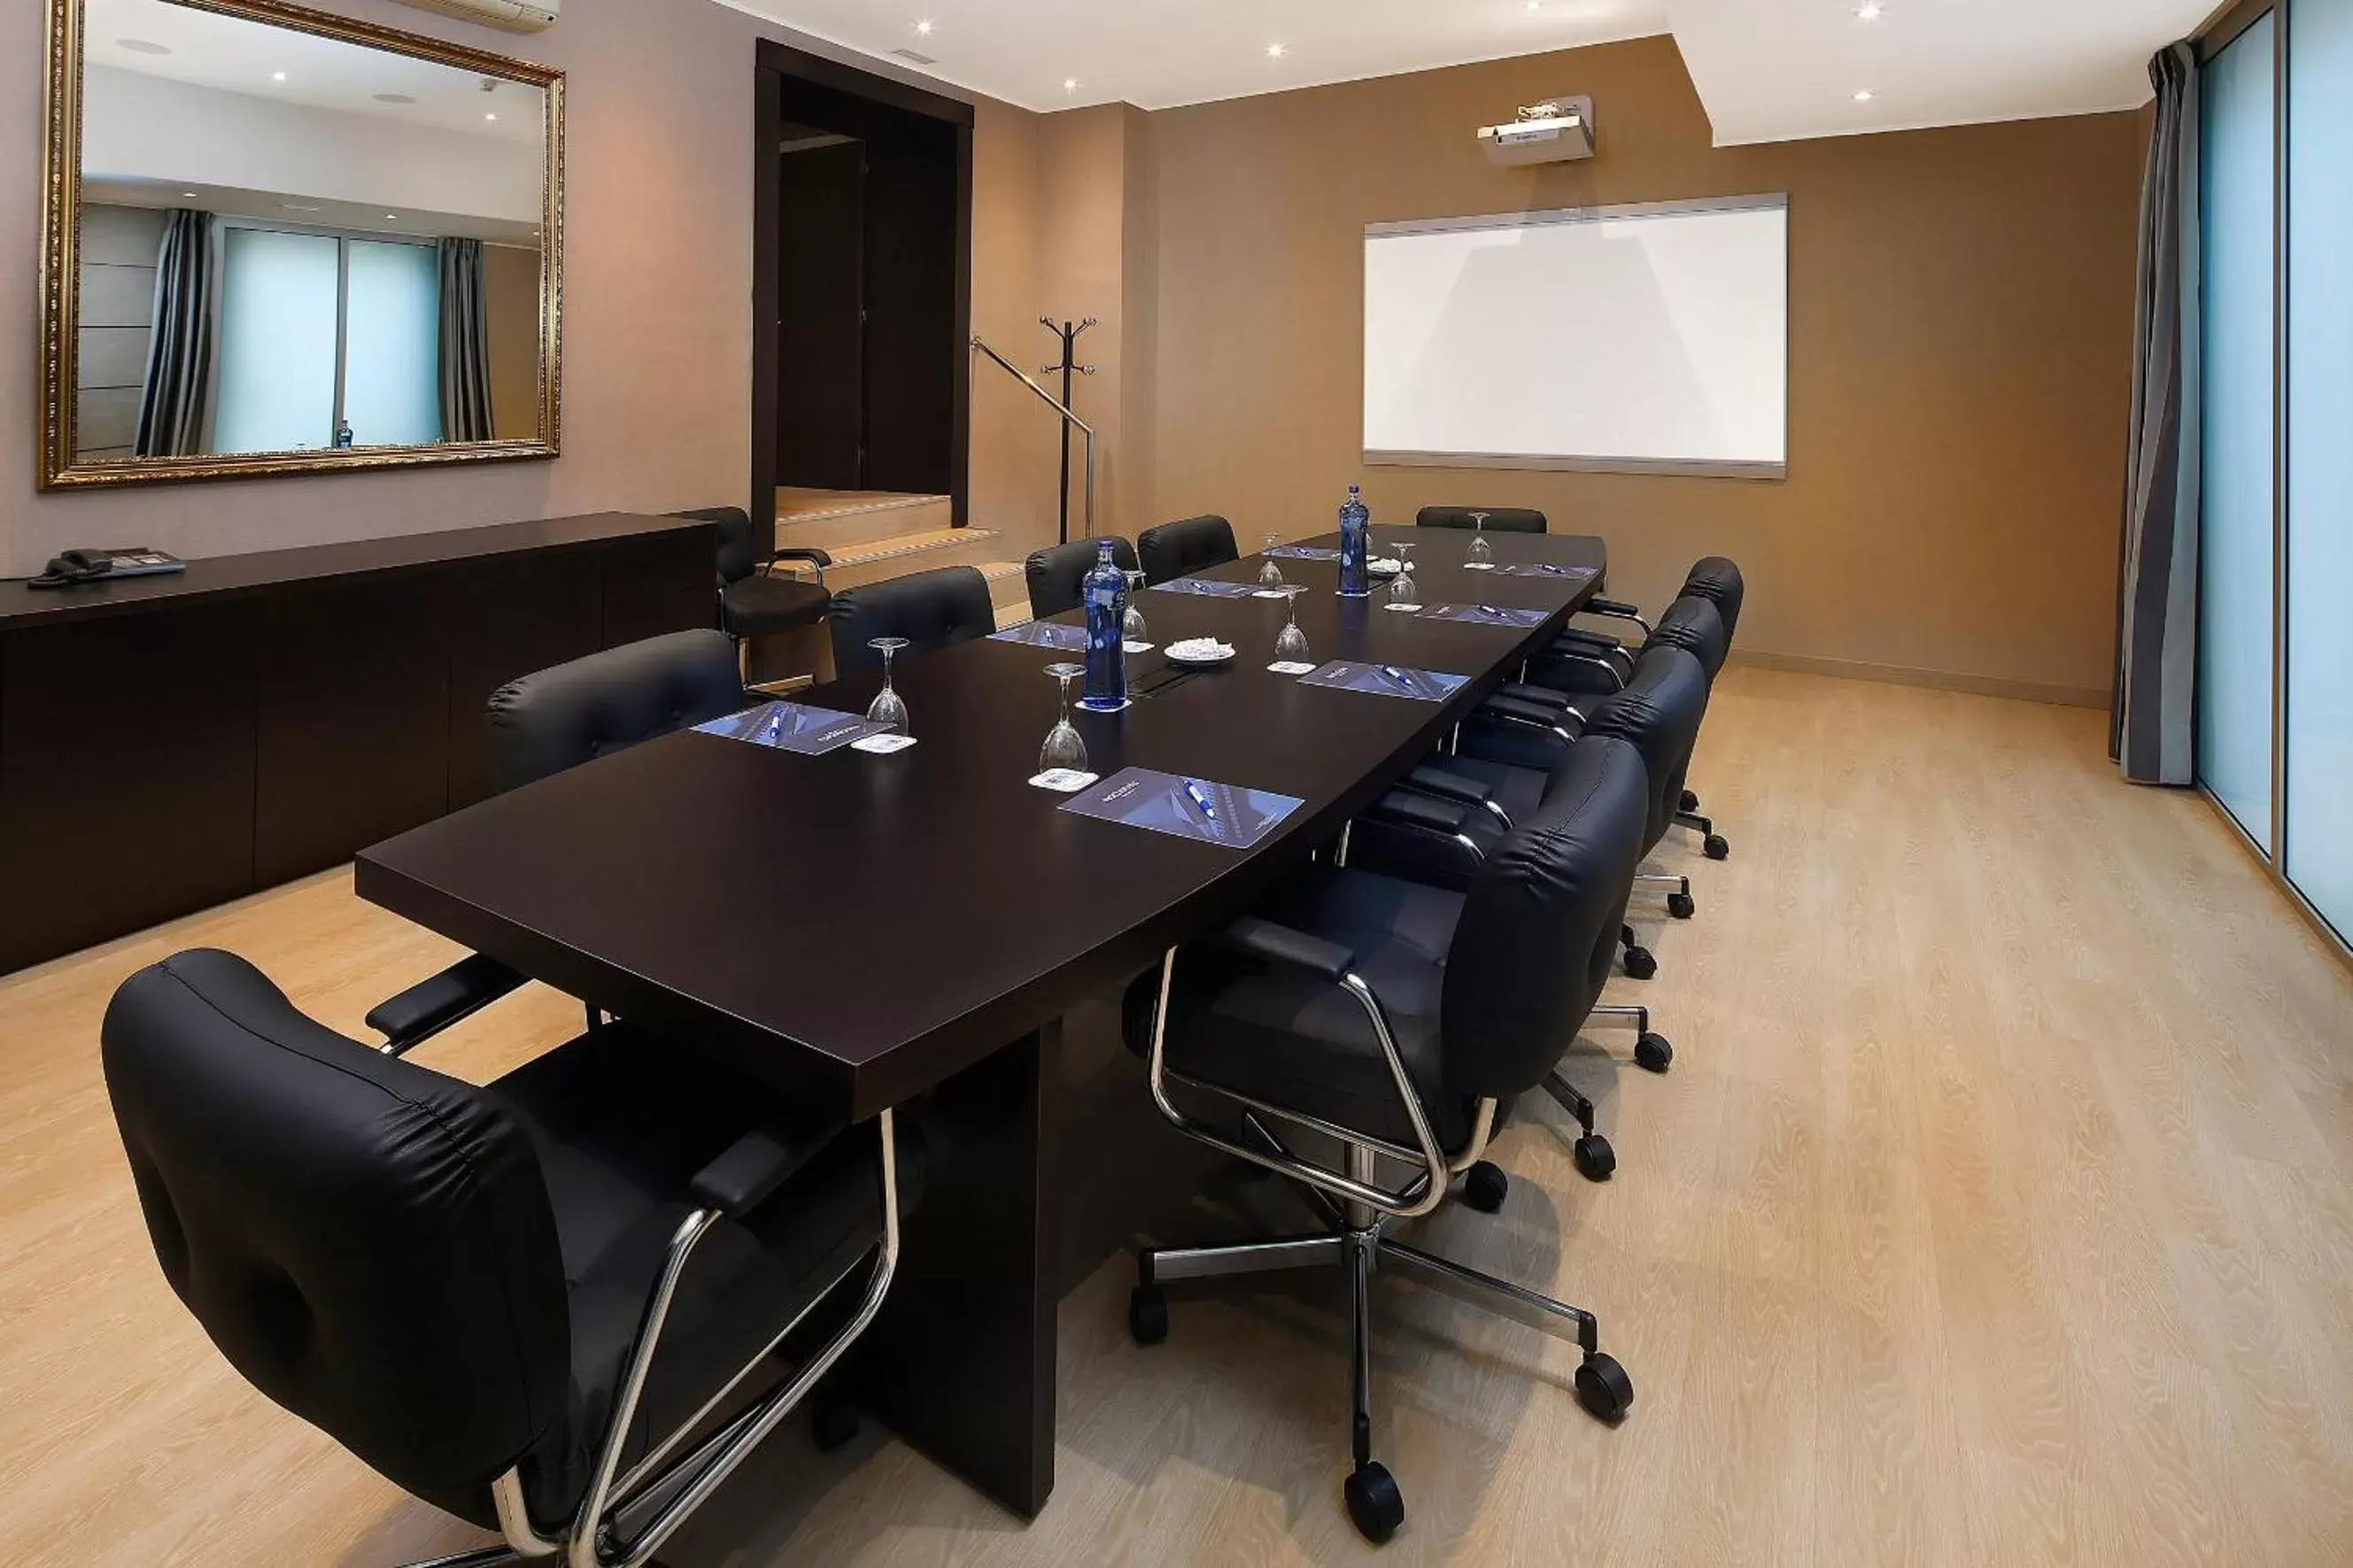 Meeting/conference room in HCC St. Moritz